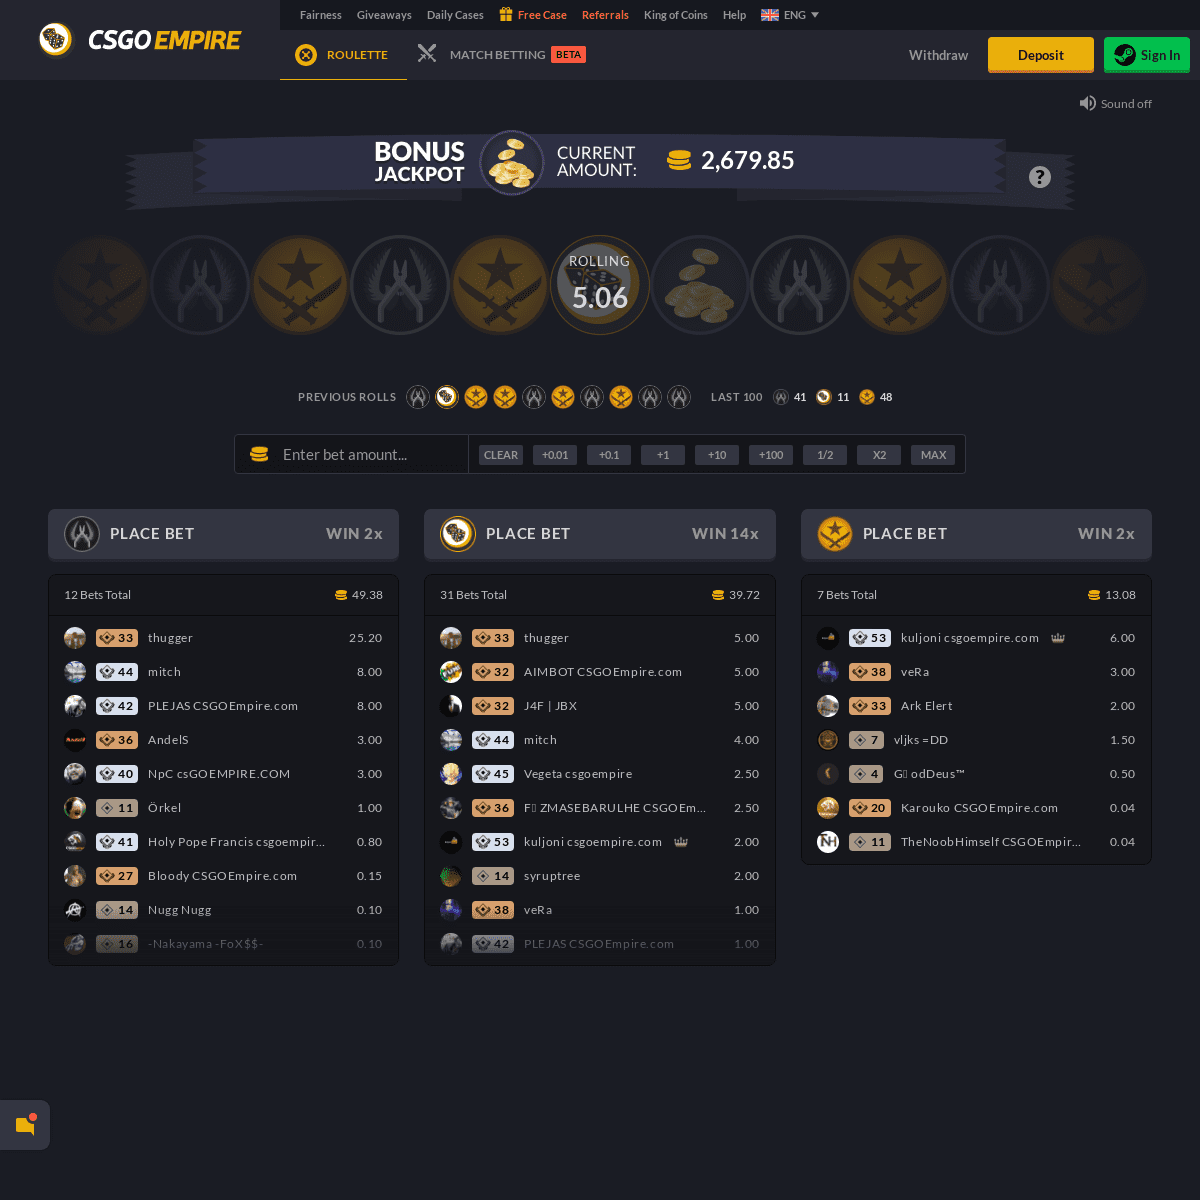 A complete backup of csgoempire.com